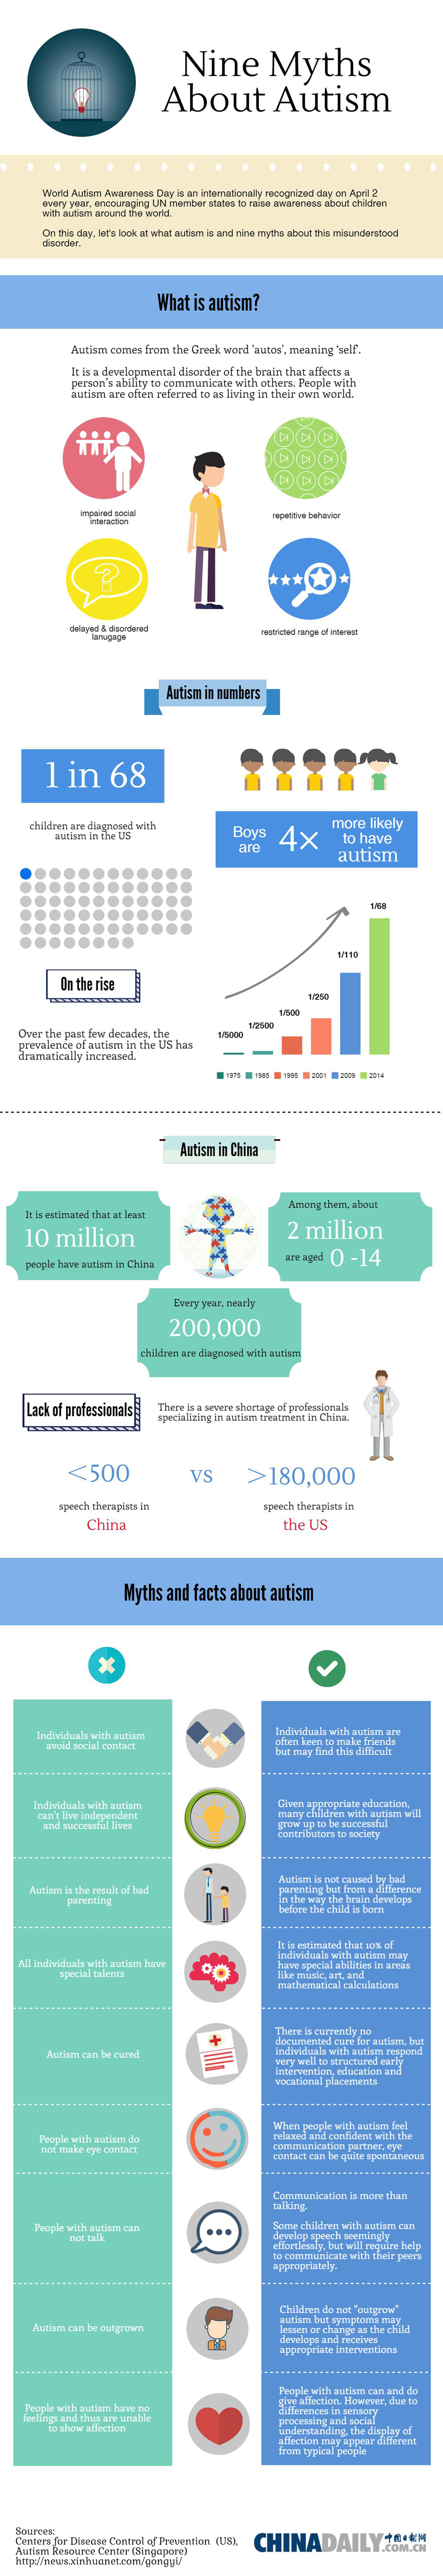 Infographic: Nine myths about autism